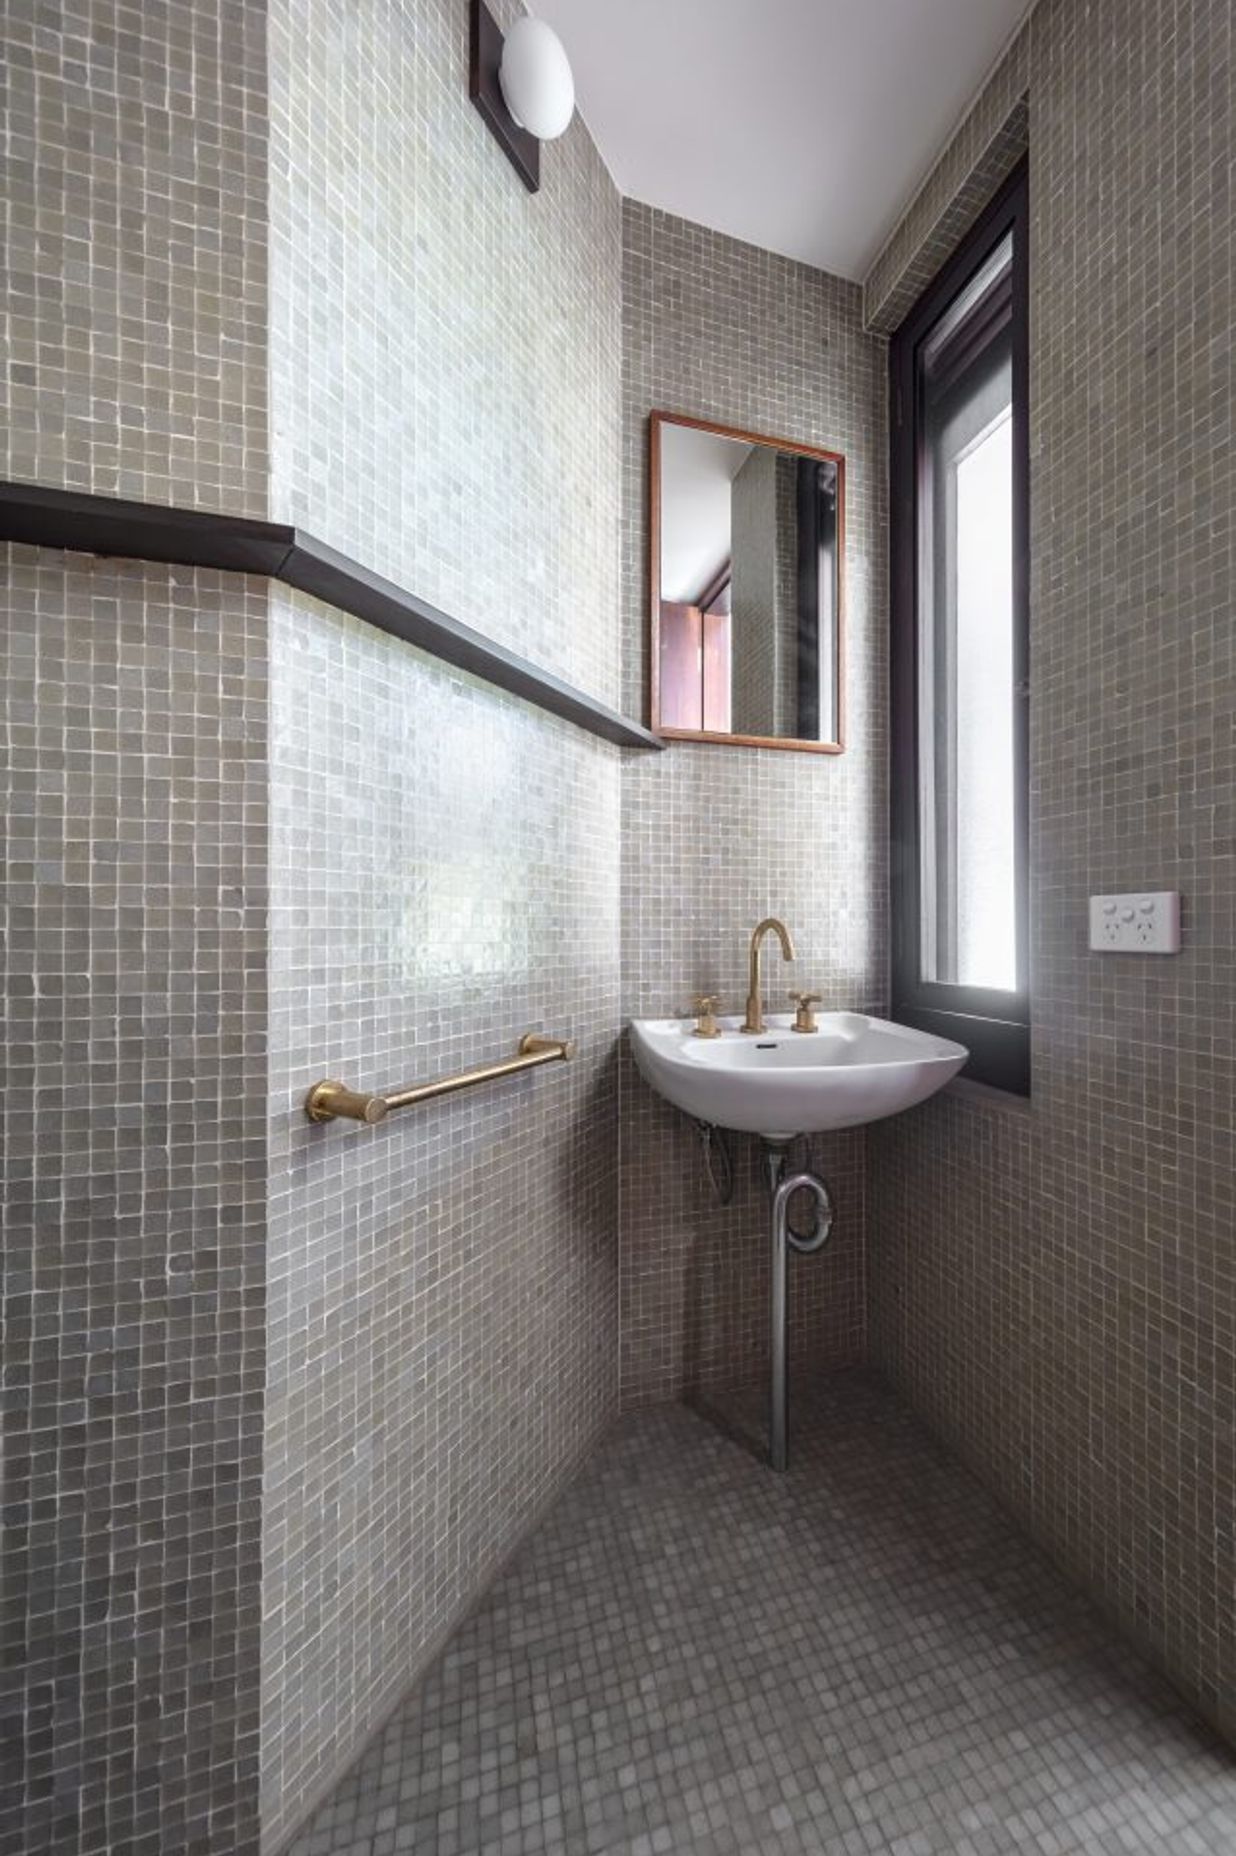 Our clients loved the mosaic tiles in the bathroom. Image Murray Fredericks